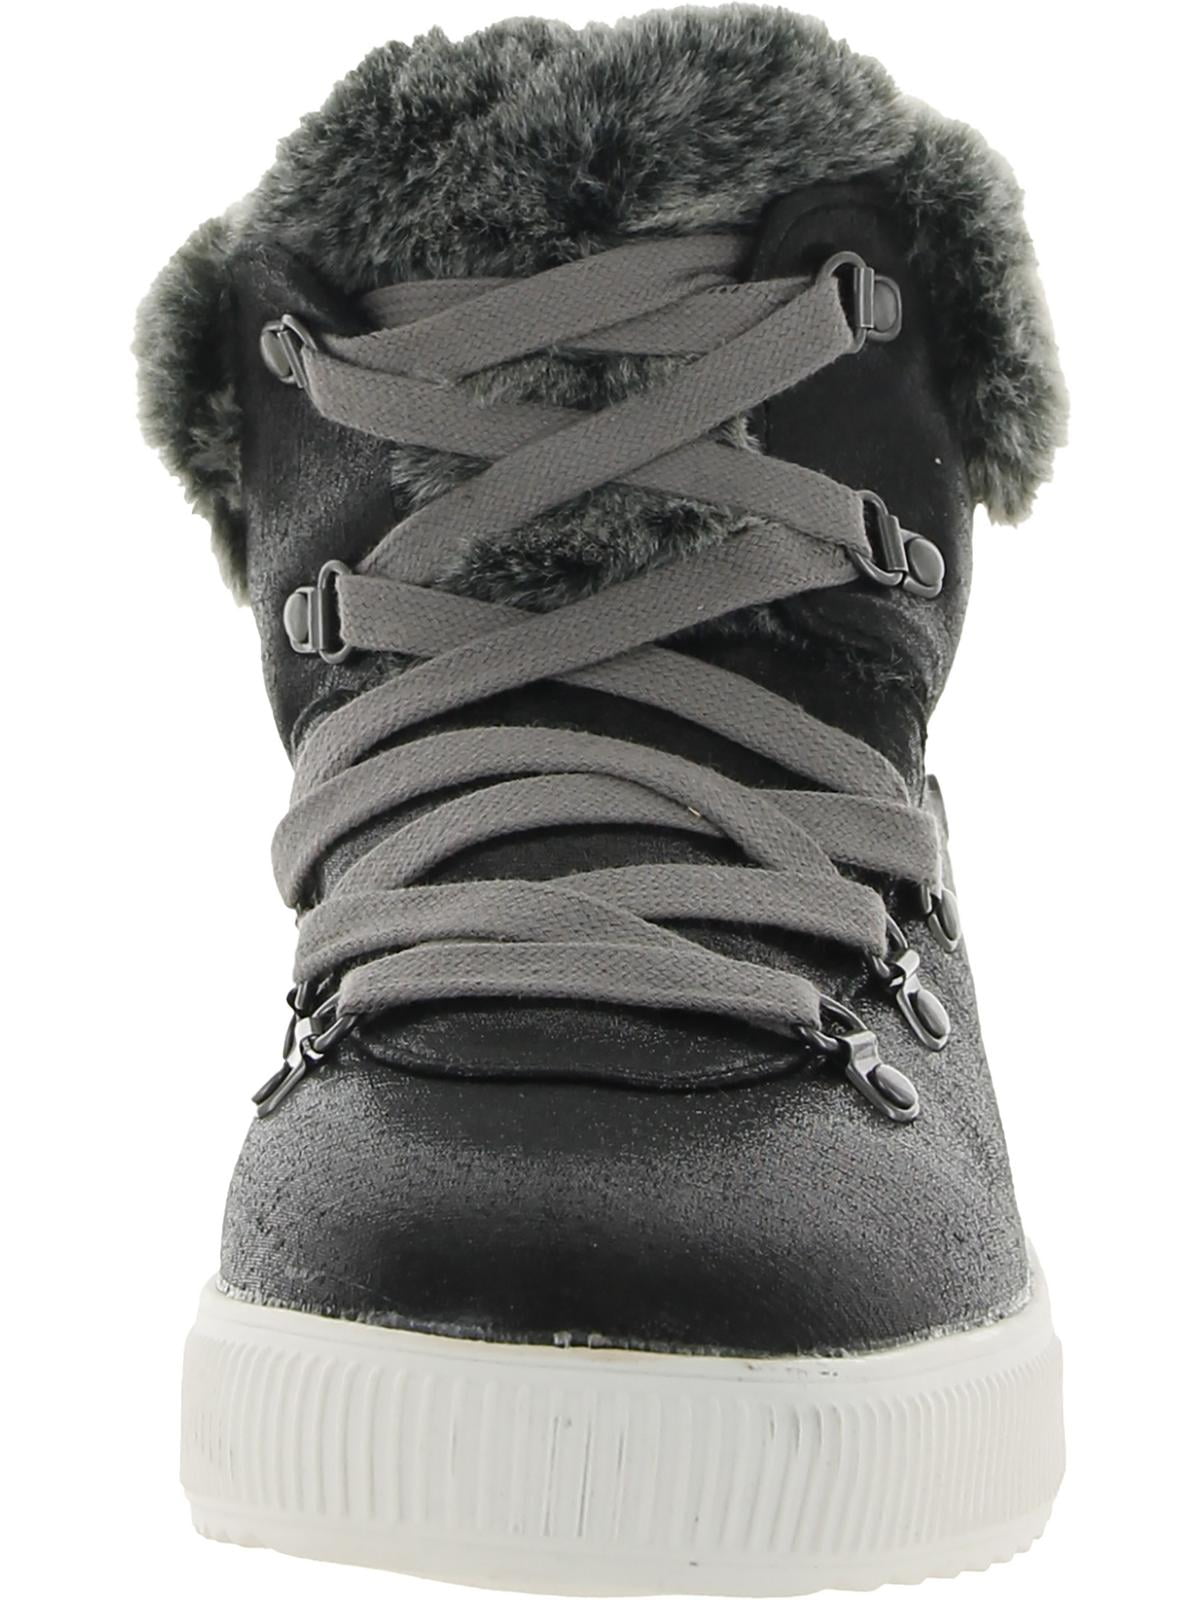 Kenneth Cole New York Kingwood High-Top Sneaker - Free Shipping | DSW